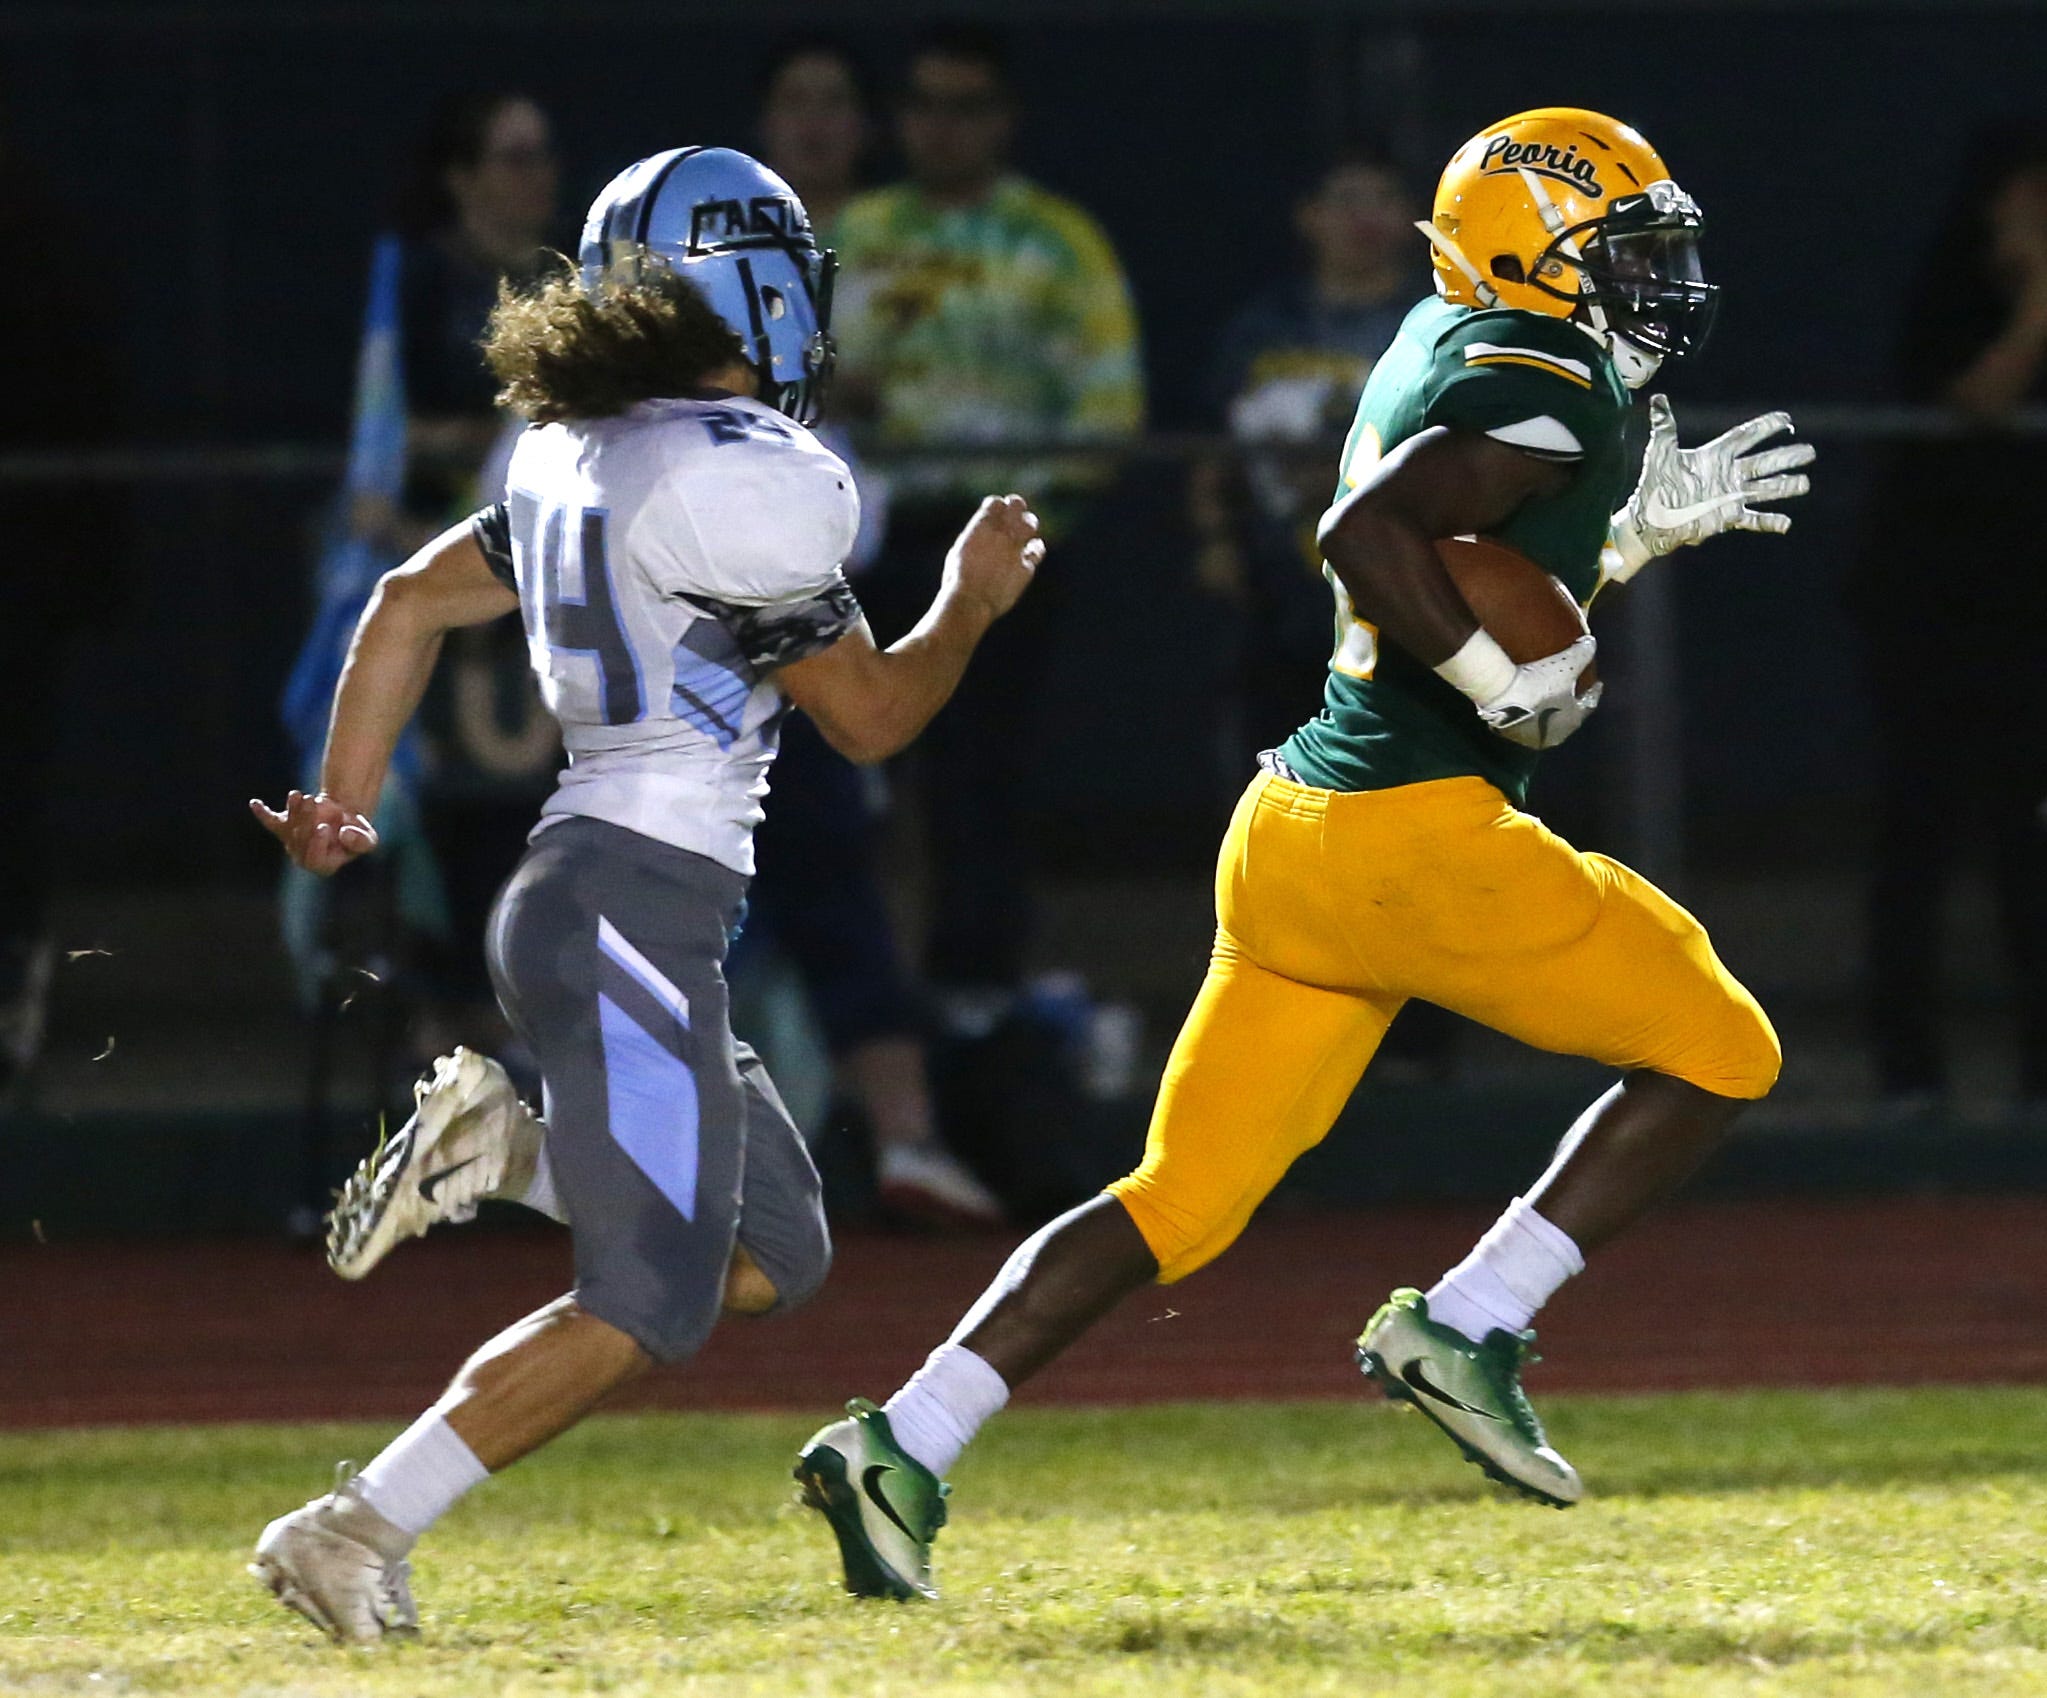 Peoria RB Juwaun Price commits to New Mexico State